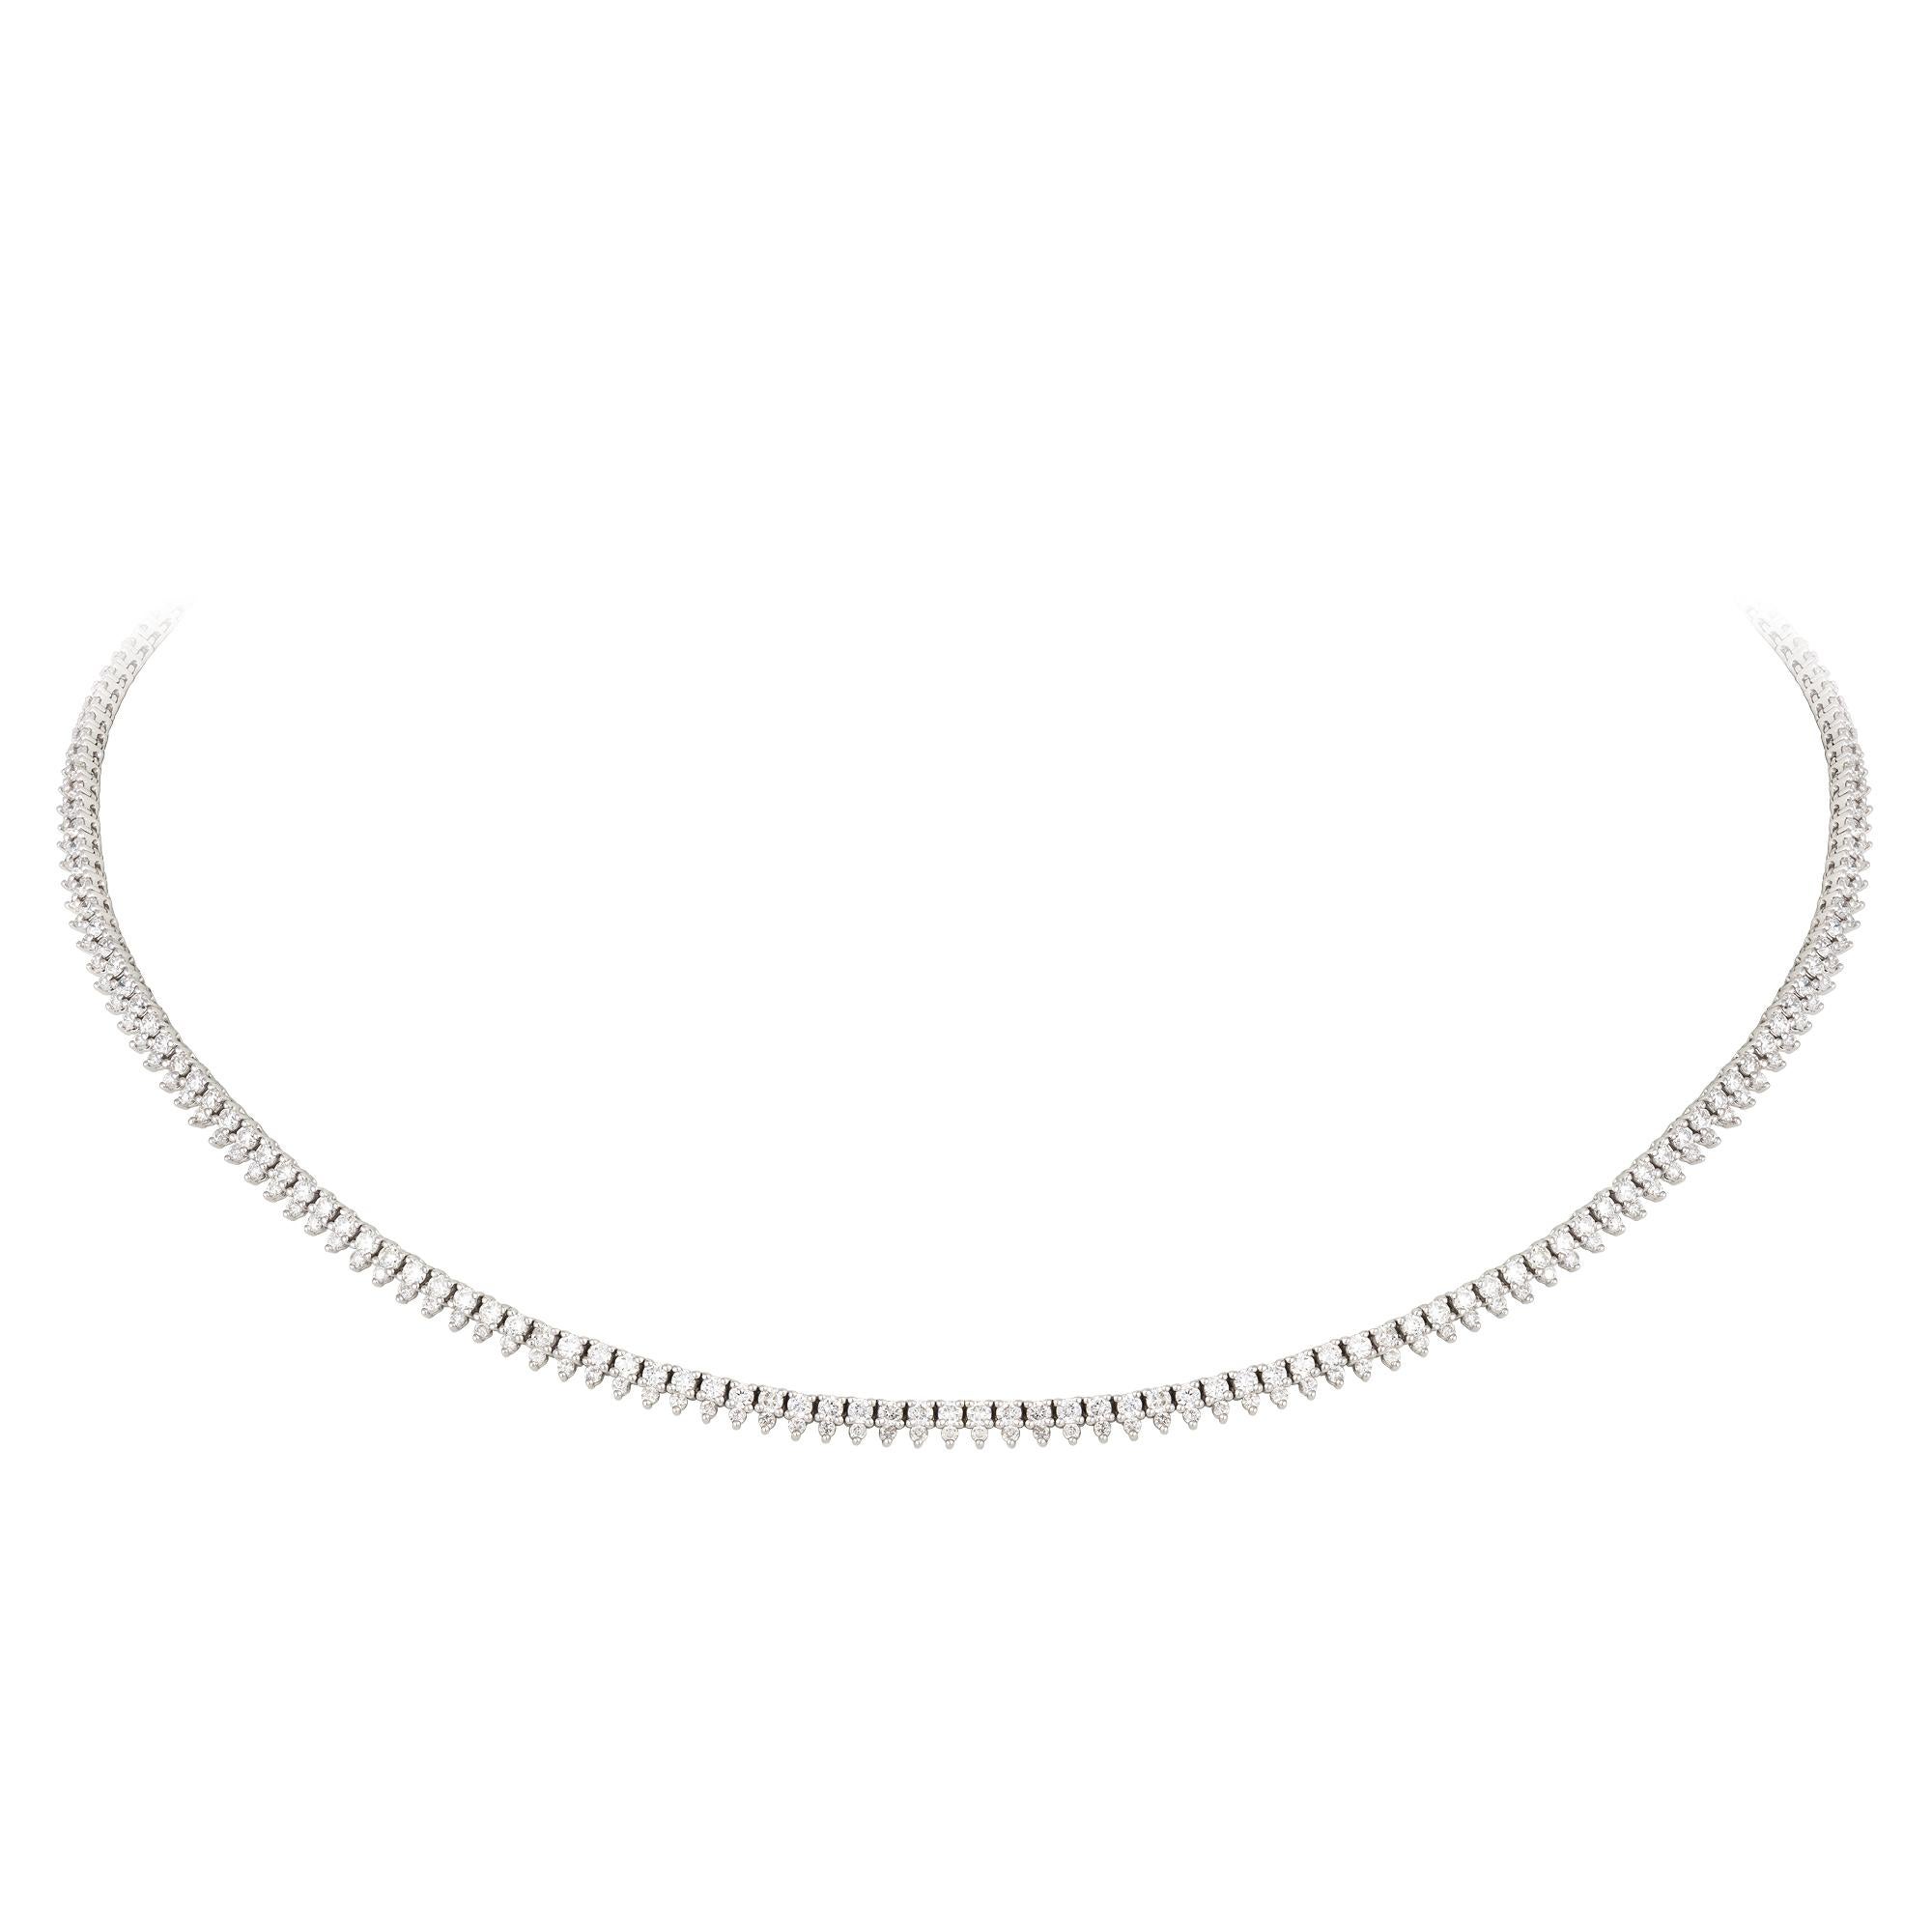 Antique Cushion Cut Fashionable Circle Diamond 18k White Gold Necklace Choker for Her For Sale